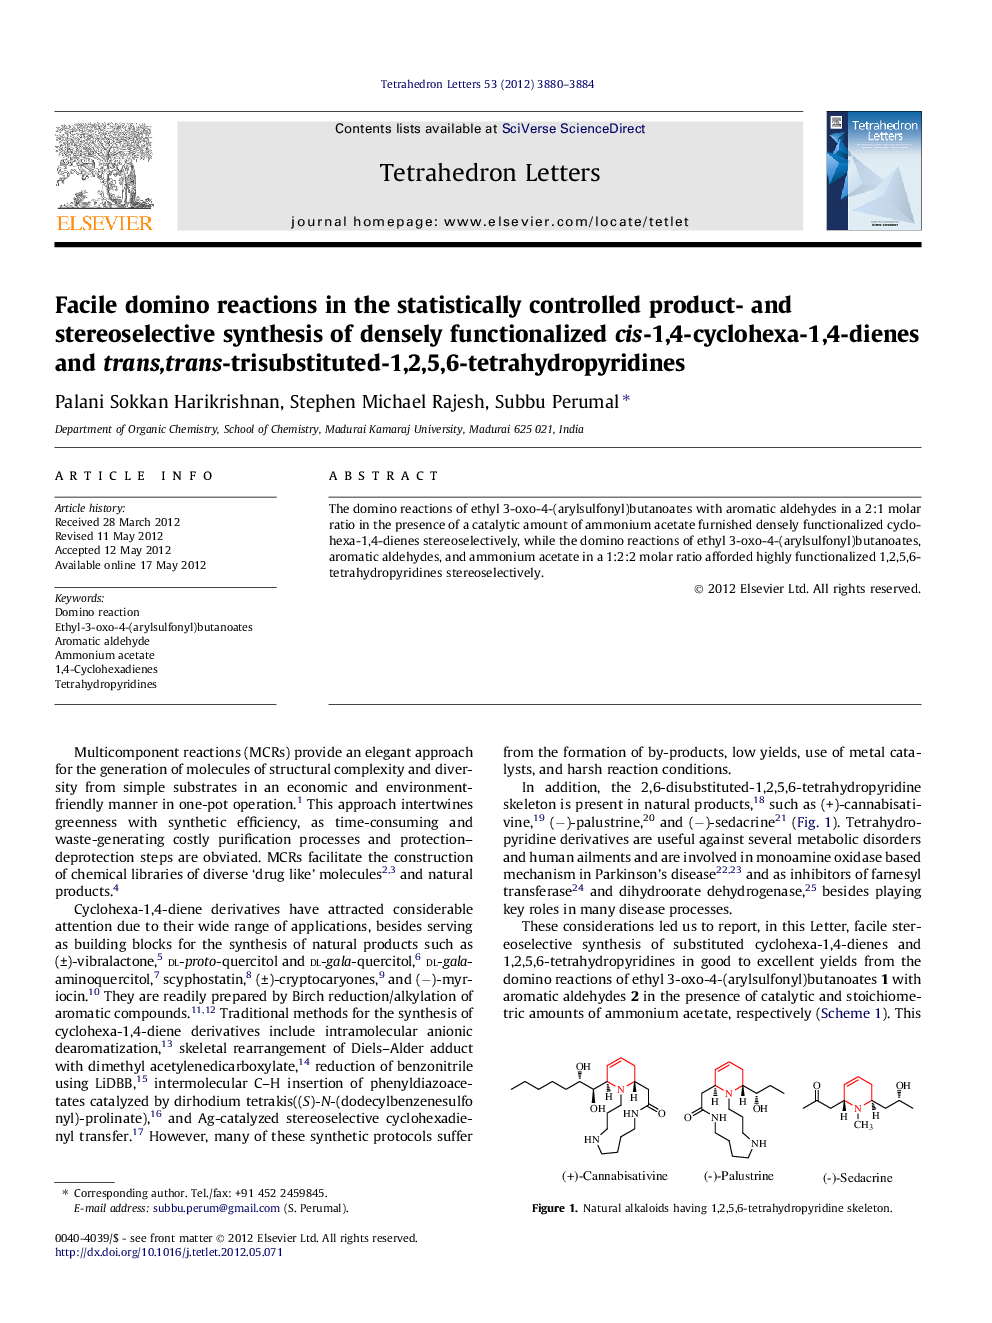 Facile domino reactions in the statistically controlled product- and stereoselective synthesis of densely functionalized cis-1,4-cyclohexa-1,4-dienes and trans,trans-trisubstituted-1,2,5,6-tetrahydropyridines